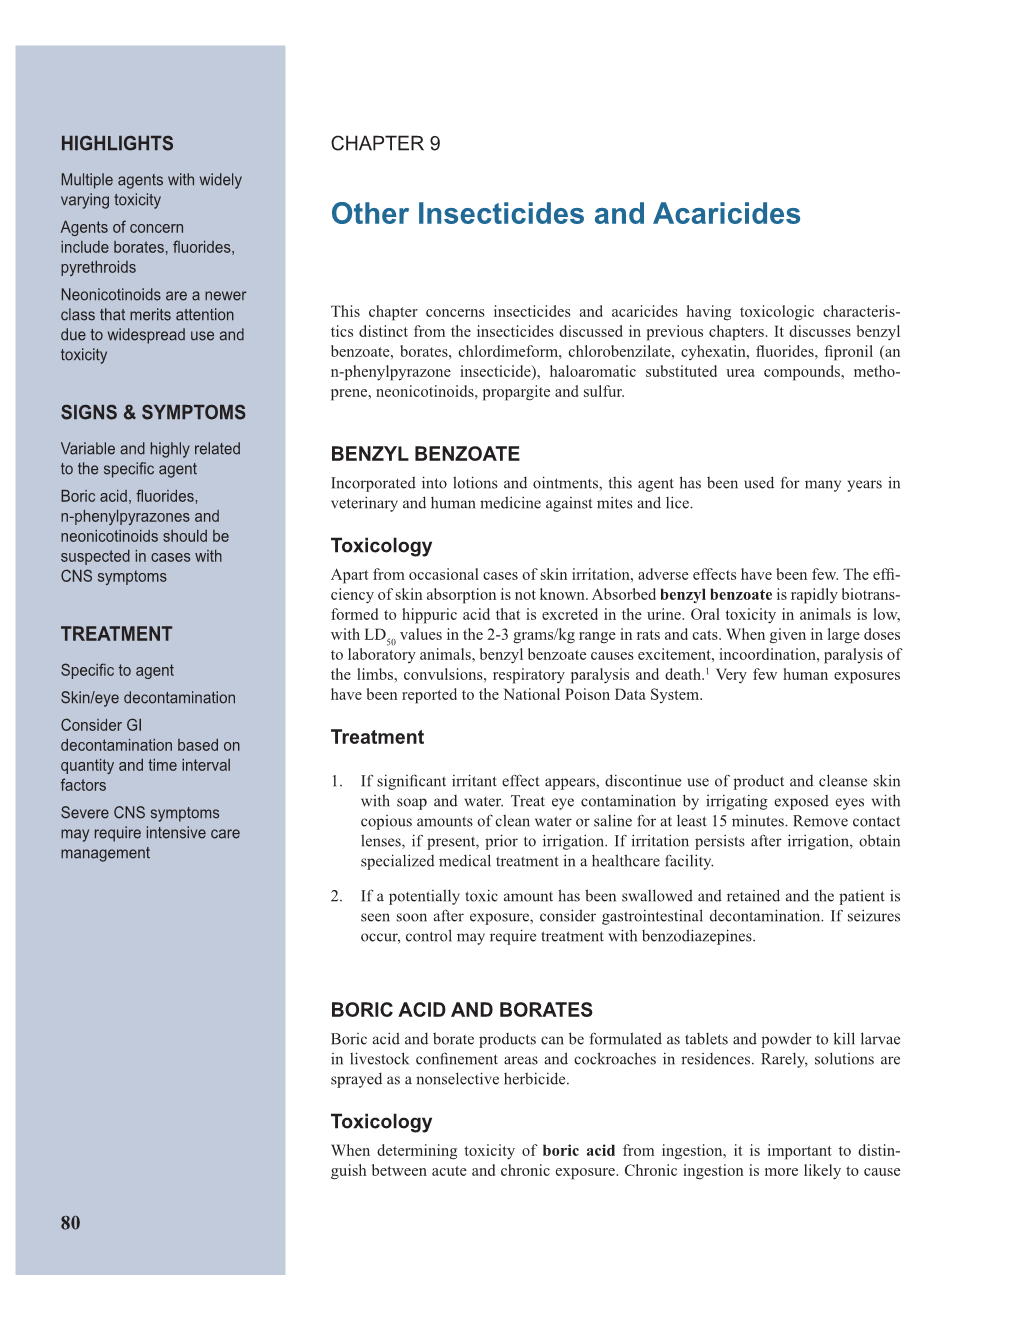 Other Insecticides and Acaricides